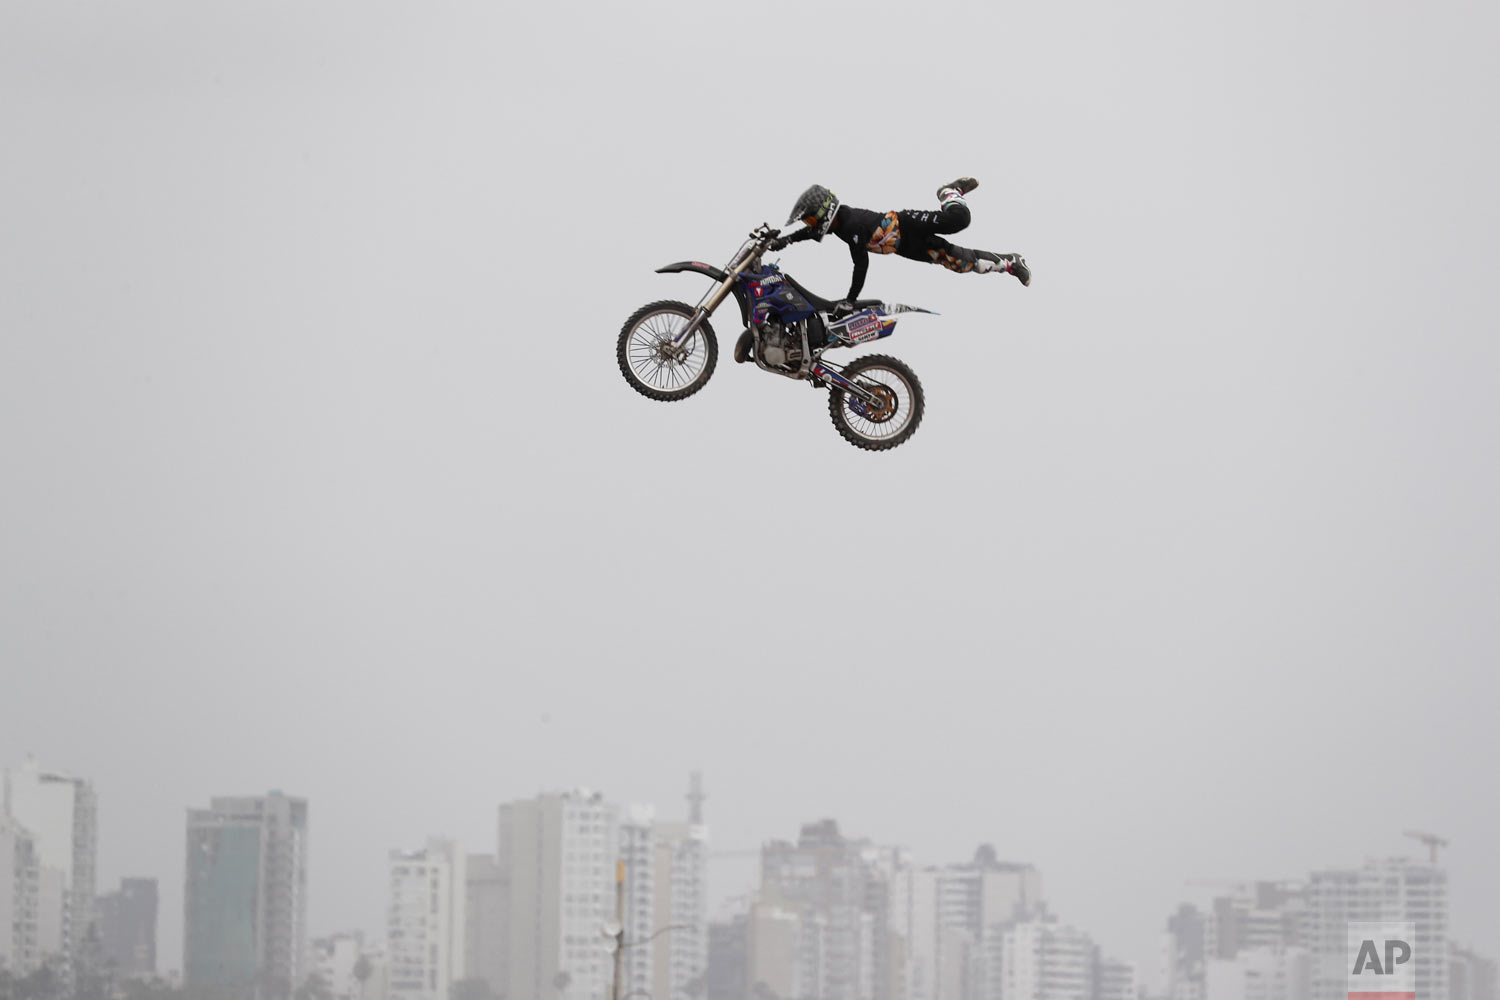  A rider performs a stunt during kick-off events for the Dakar Rally in Lima, Peru, Jan. 6, 2019. (AP Photo/Martin Mejia) 